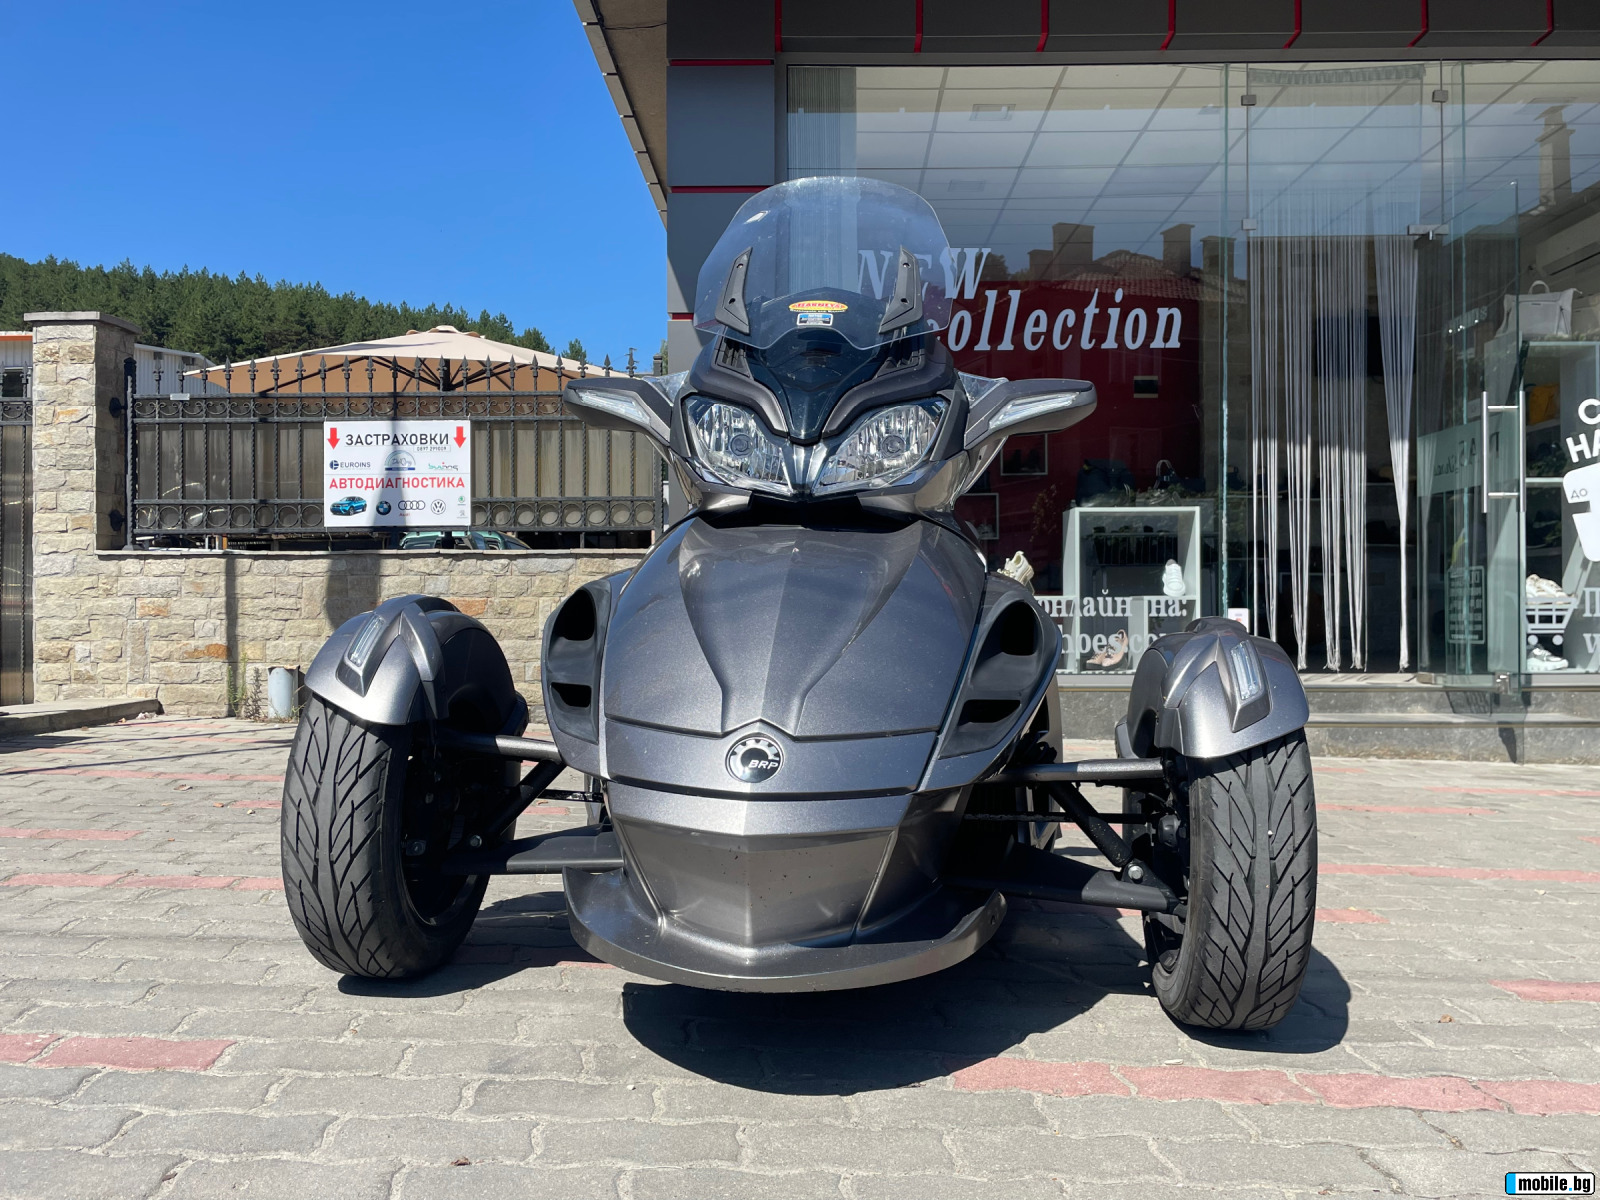 Can-Am Spyder STS | Mobile.bg   6